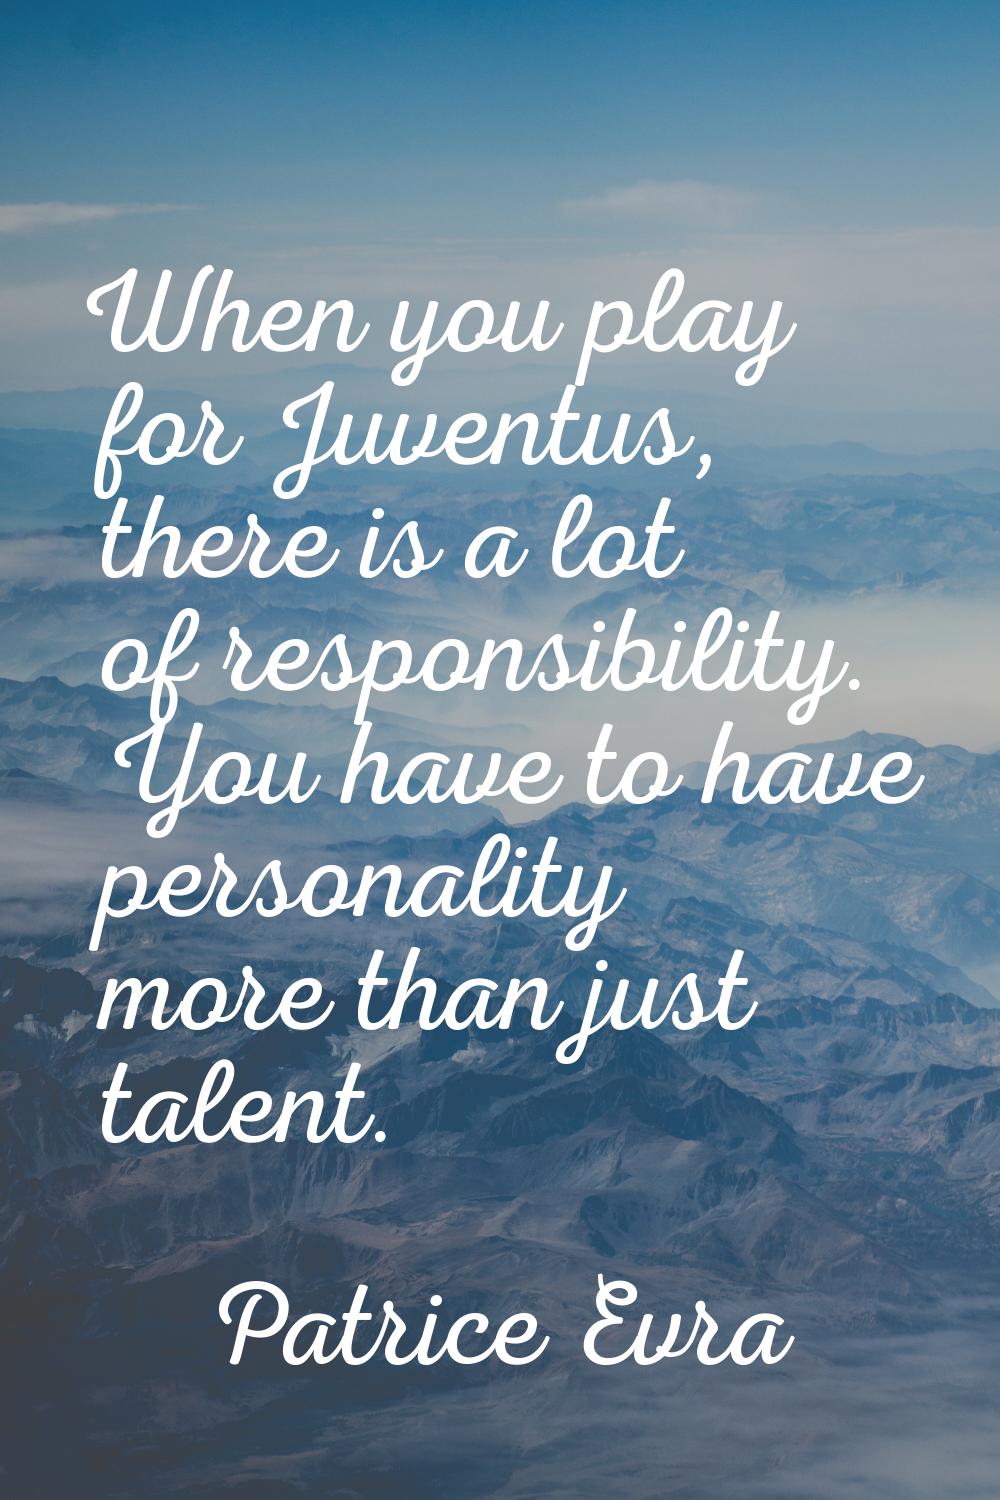 When you play for Juventus, there is a lot of responsibility. You have to have personality more tha